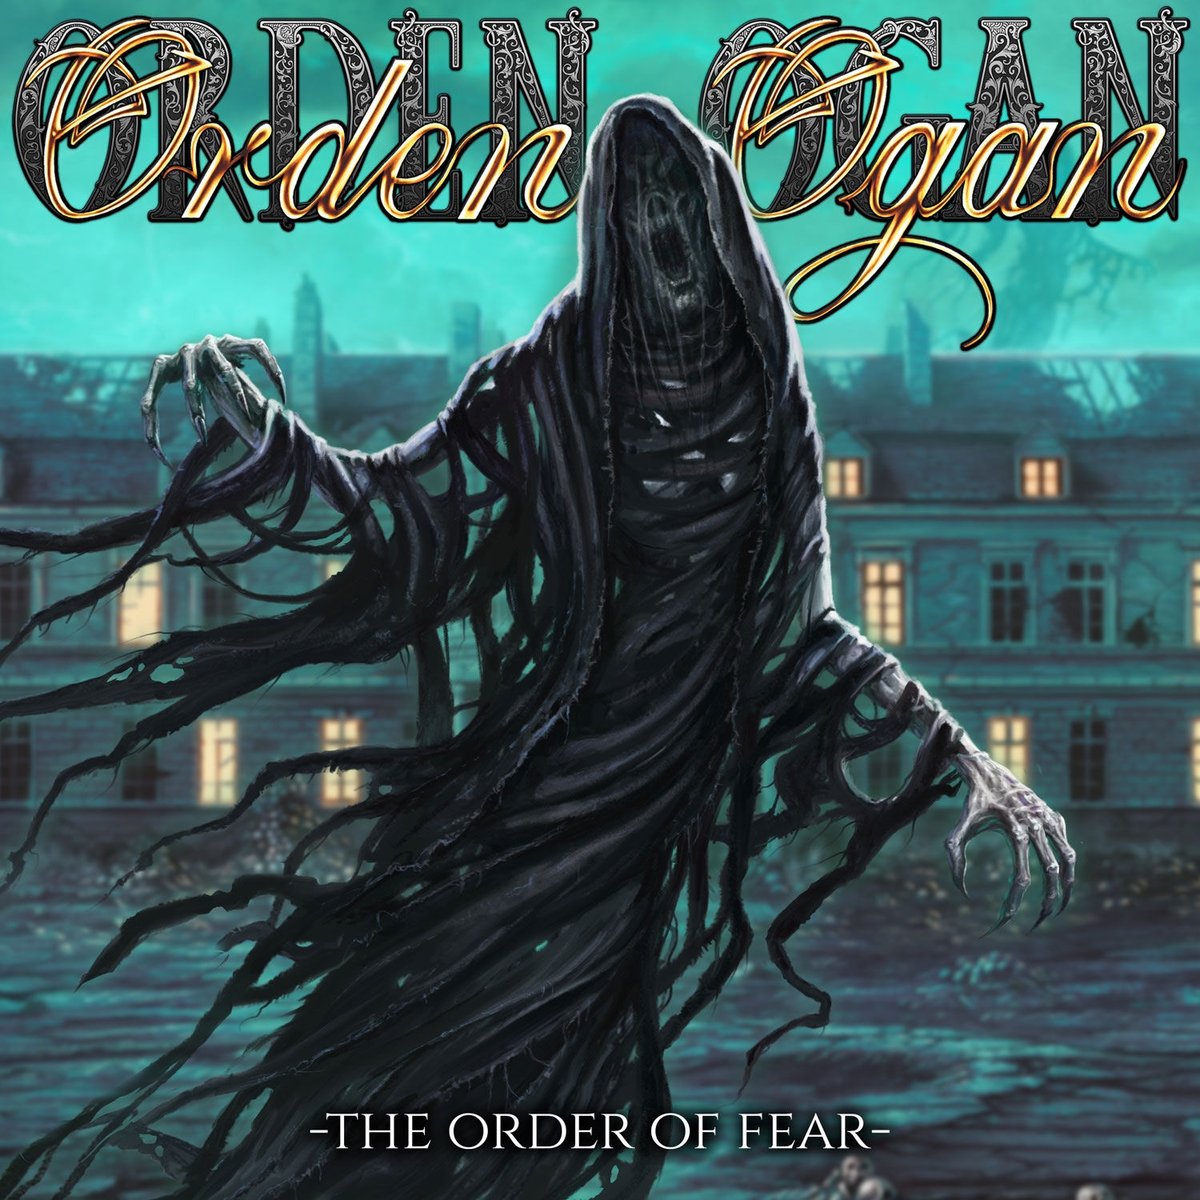 The title track single of @ORDENOGAN's highly anticipated upcoming album 'The Order Of Fear' is set to be released on Friday, April 5. Don't miss its launch and pre-save it now: ordenogan.rpm.link/theordersingle… #ORDENOGAN #TheOrderOfFear #NewMusic #PreSaveNow #PowerMetal #GermanMetal